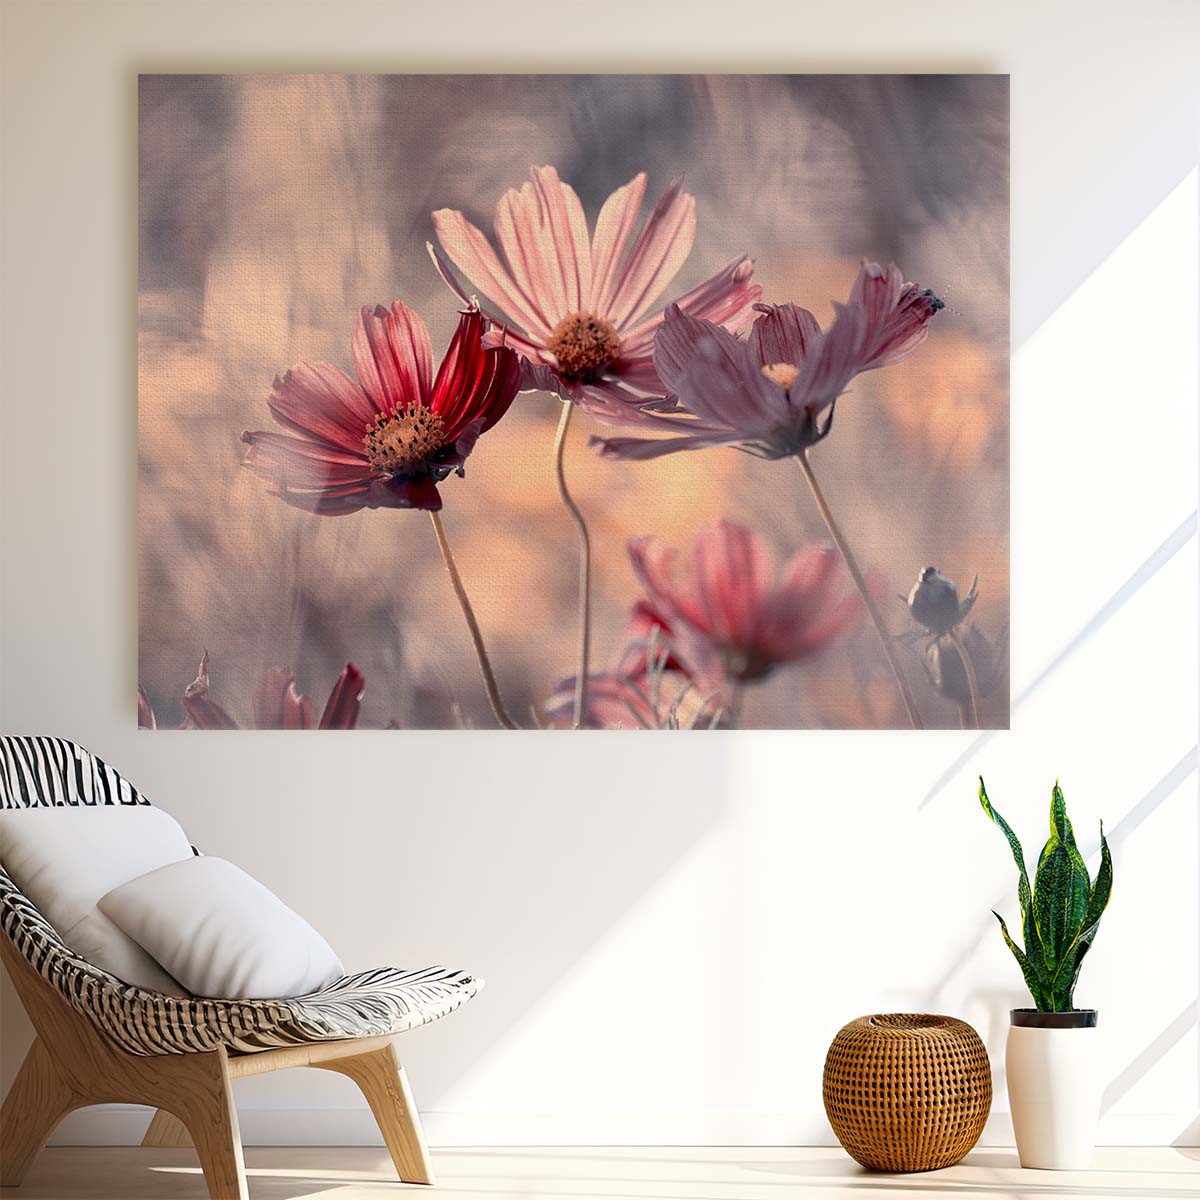 Romantic Pink Floral Trio Macro Bokeh Wall Art by Luxuriance Designs. Made in USA.